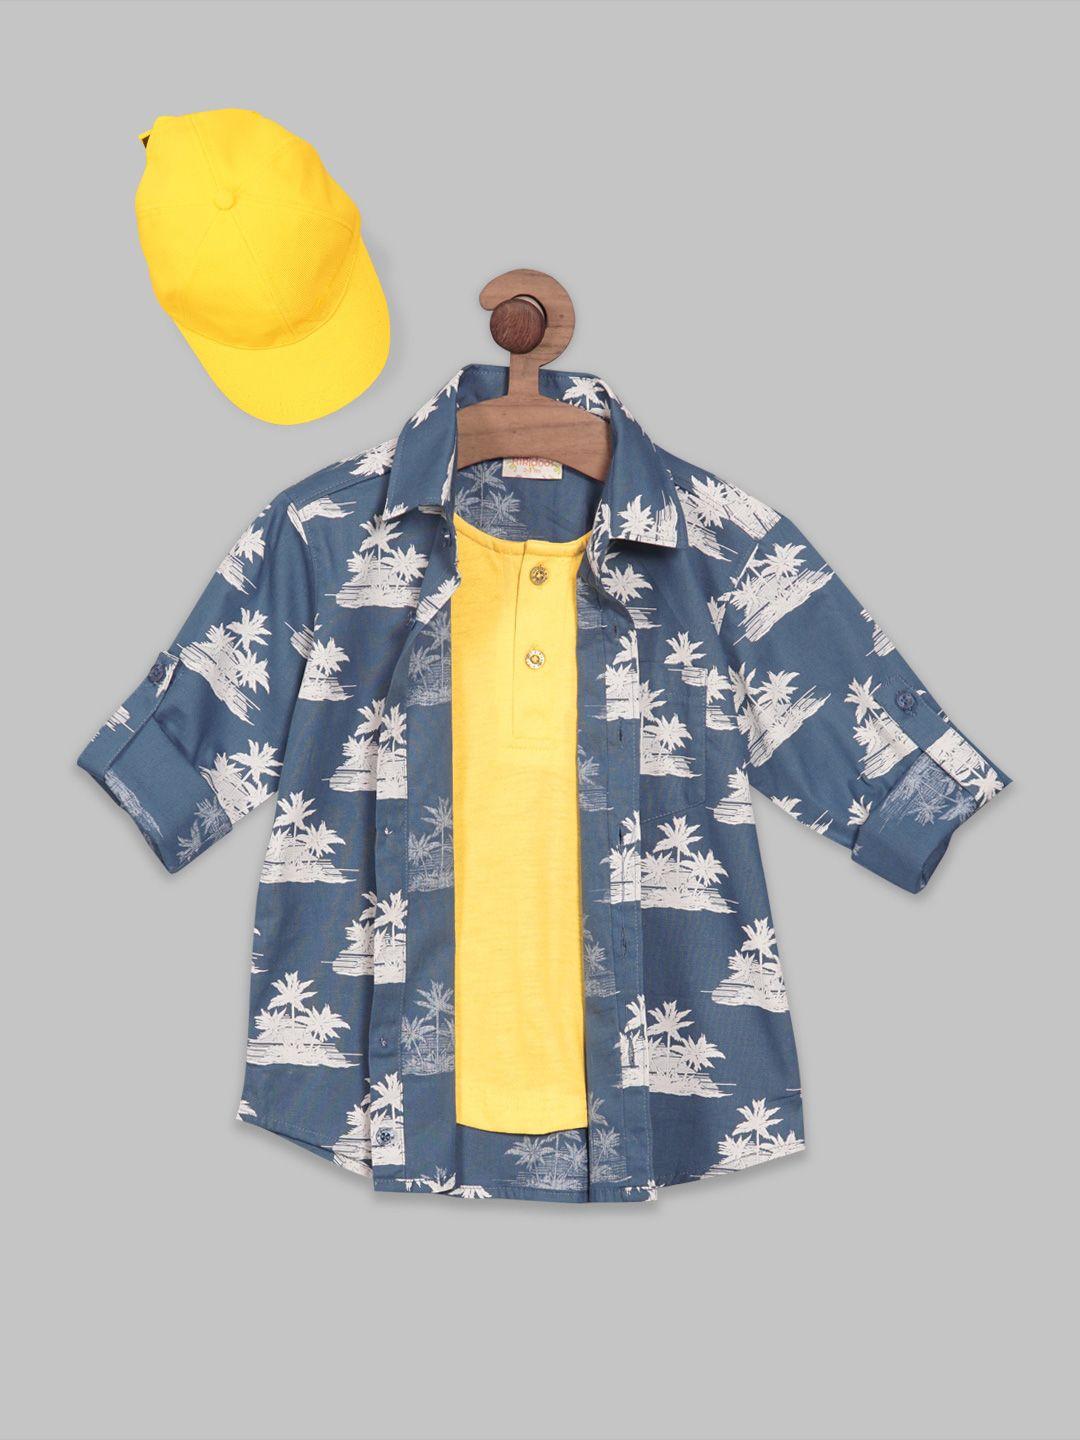 rikidoos boys tropical printed smart casual cotton shirt with attached t-shirt & cap